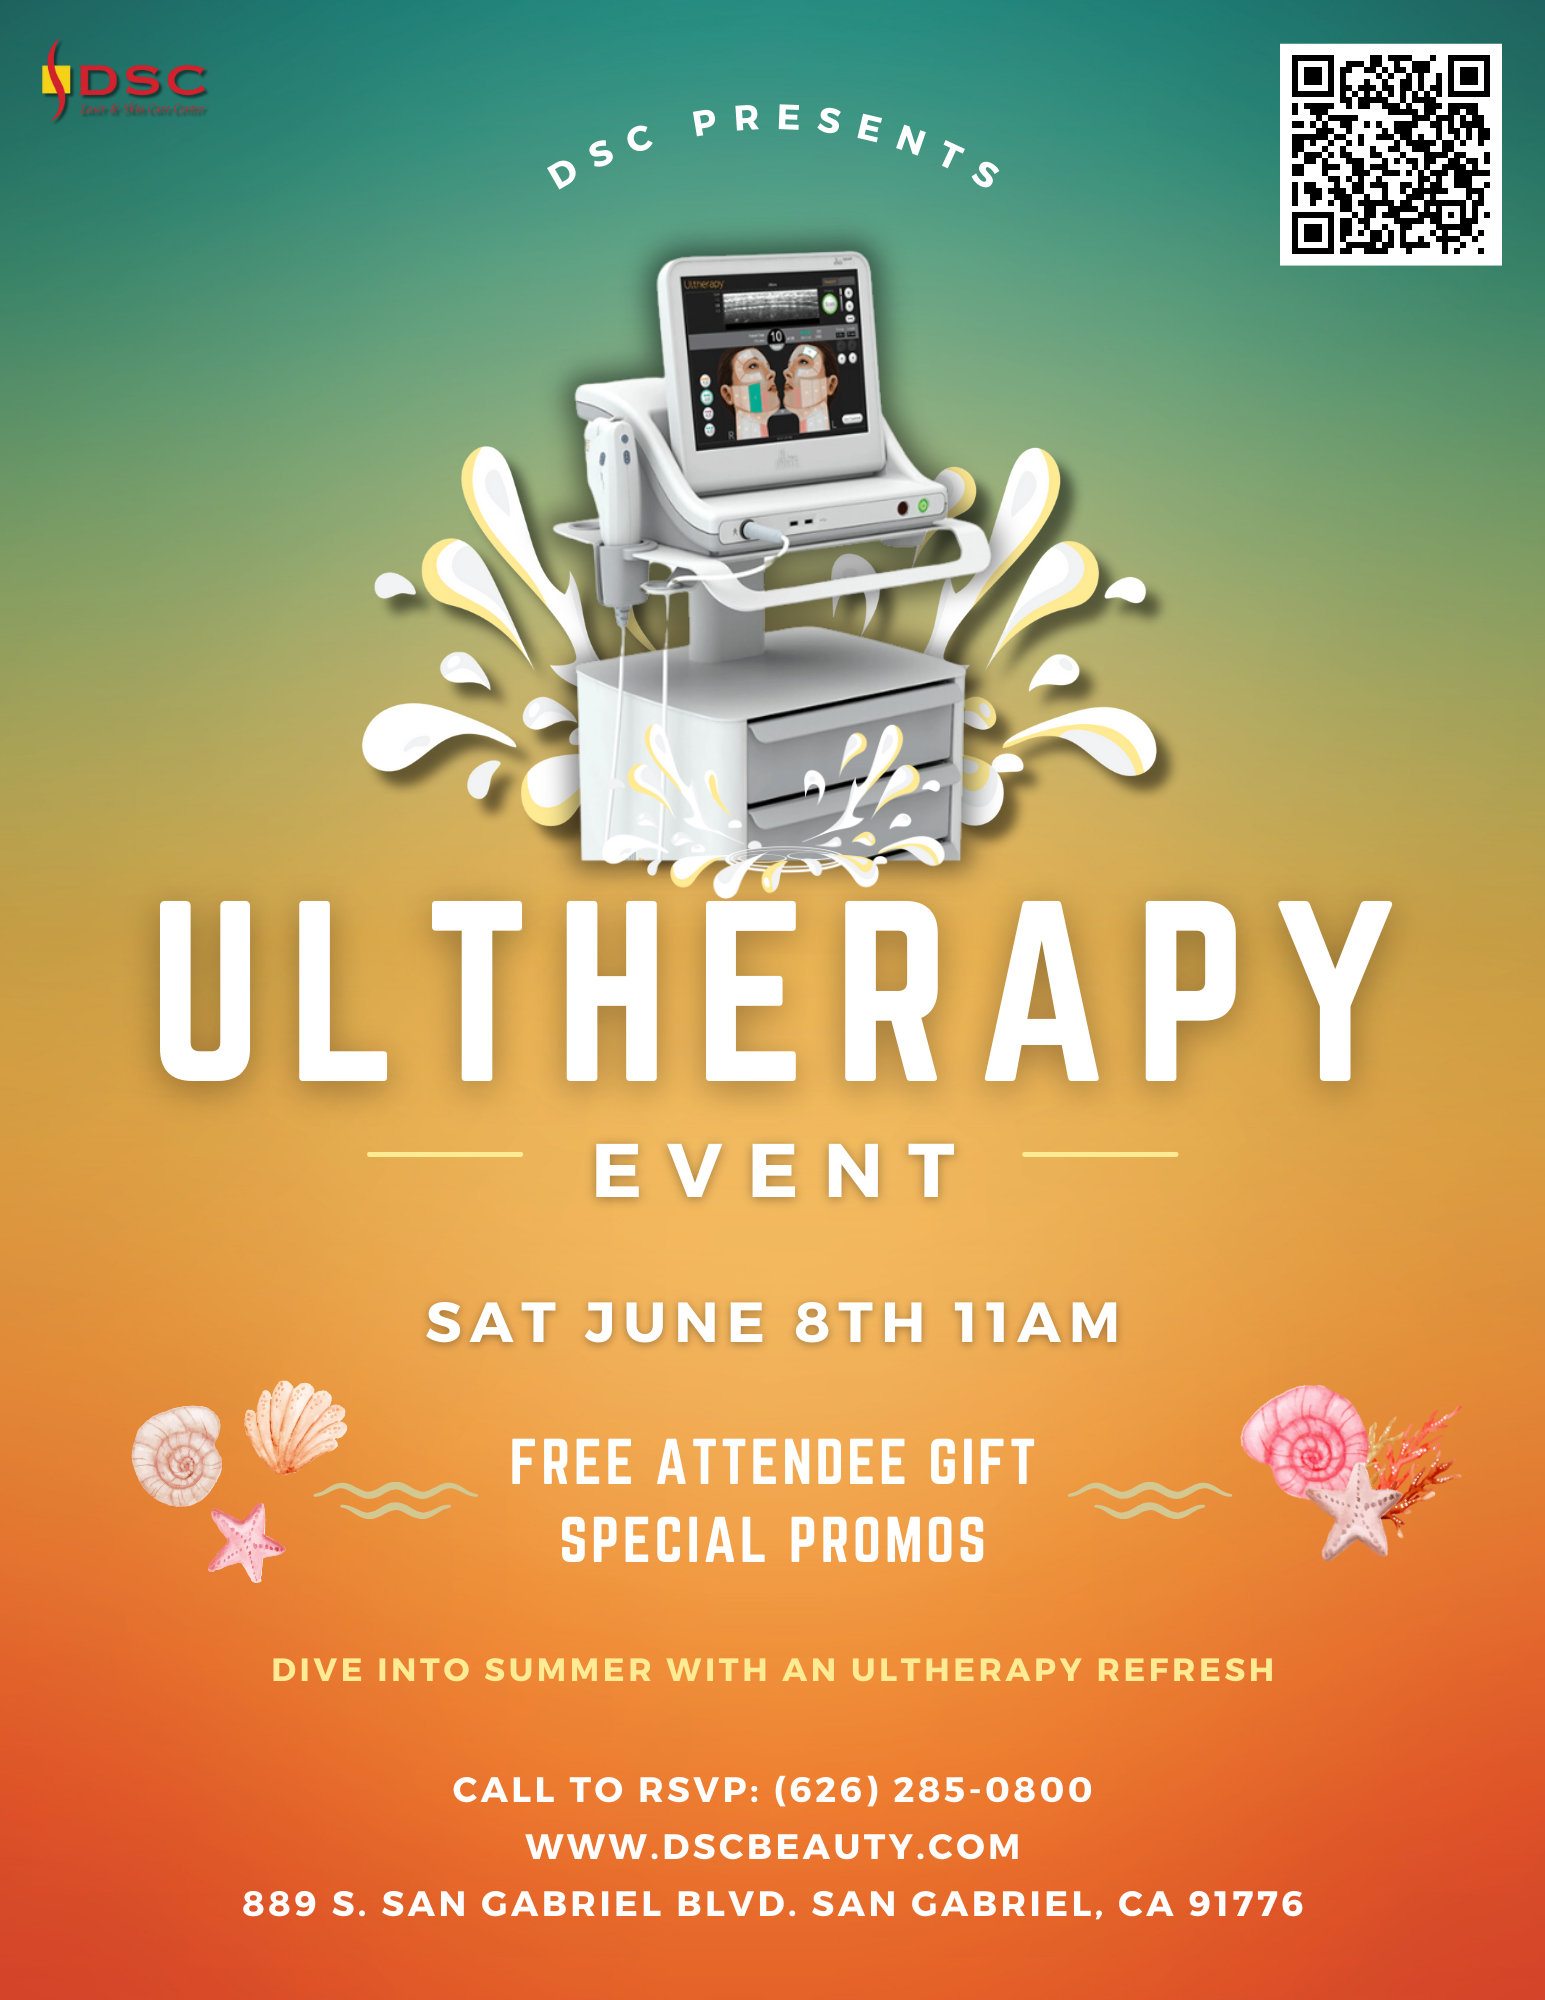 DSC June 8th 2024 Ultherapy Event Poster with DSC Logo at the top, Ultherapy device and white splash centered, with text Ultherapy Event Sat June 8th 11AM Free Attendee Gift Special Promos Please call to RSVP (626)285-0800 and dscbeauty.com and 889 S San Gabriel Blvd. San Gabriel, CA 91776